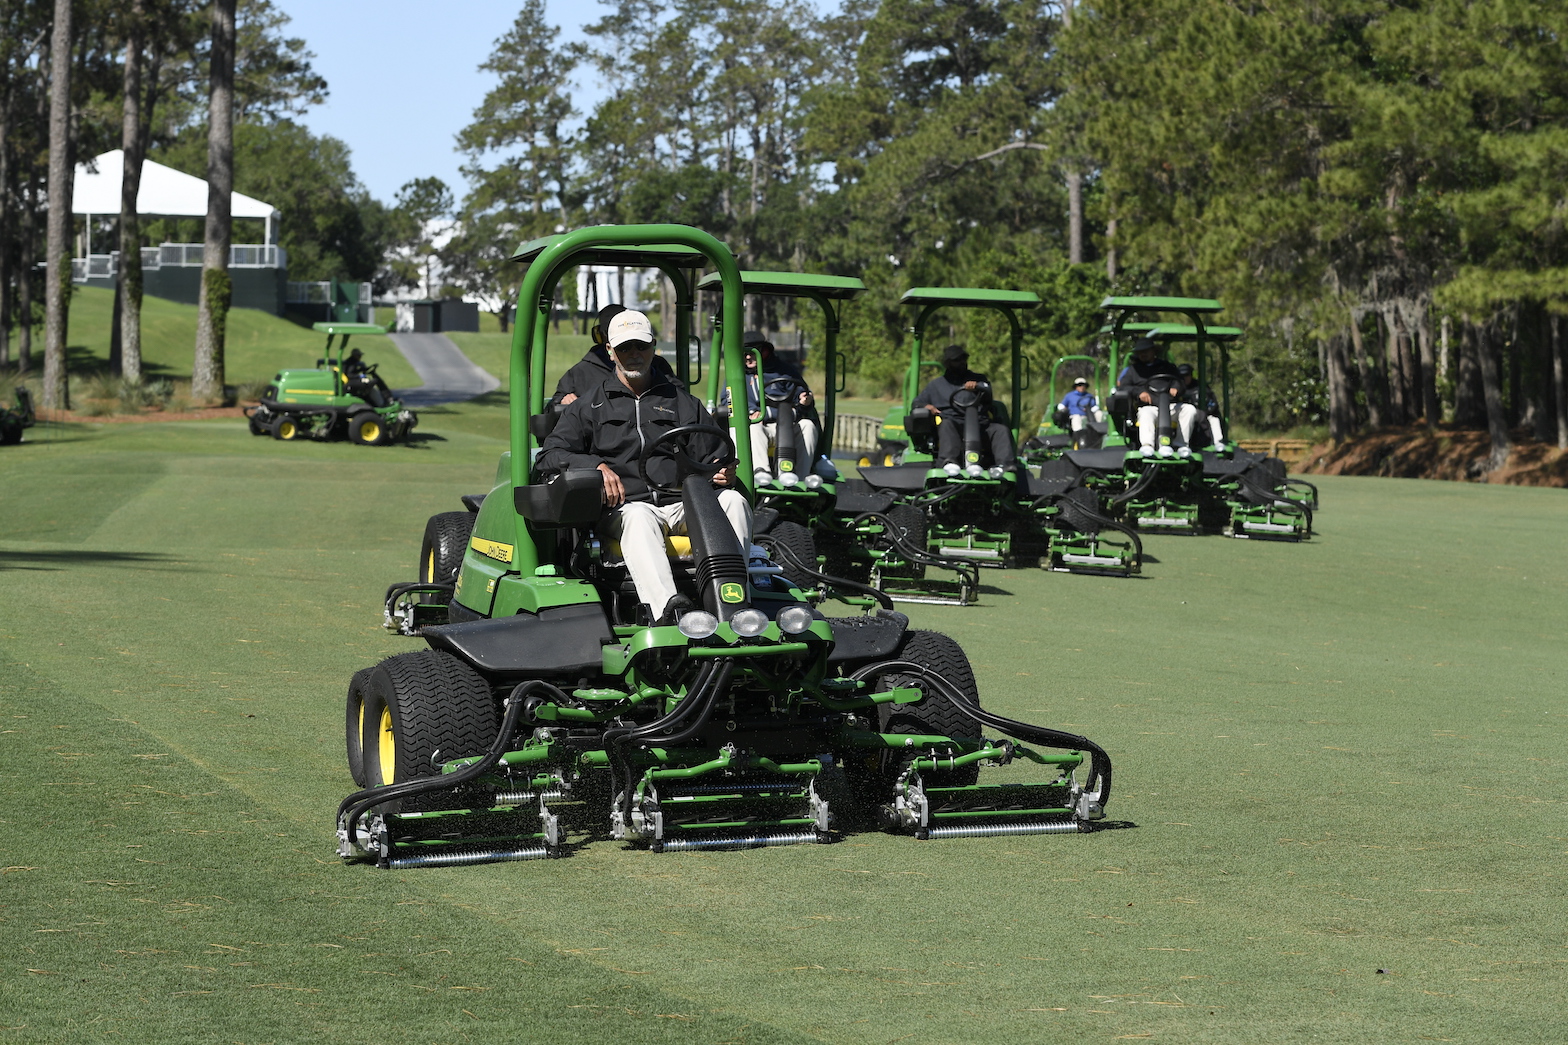 Fairway lawnmowers are seen during previews prior to the start of THE PLAYERS Championship